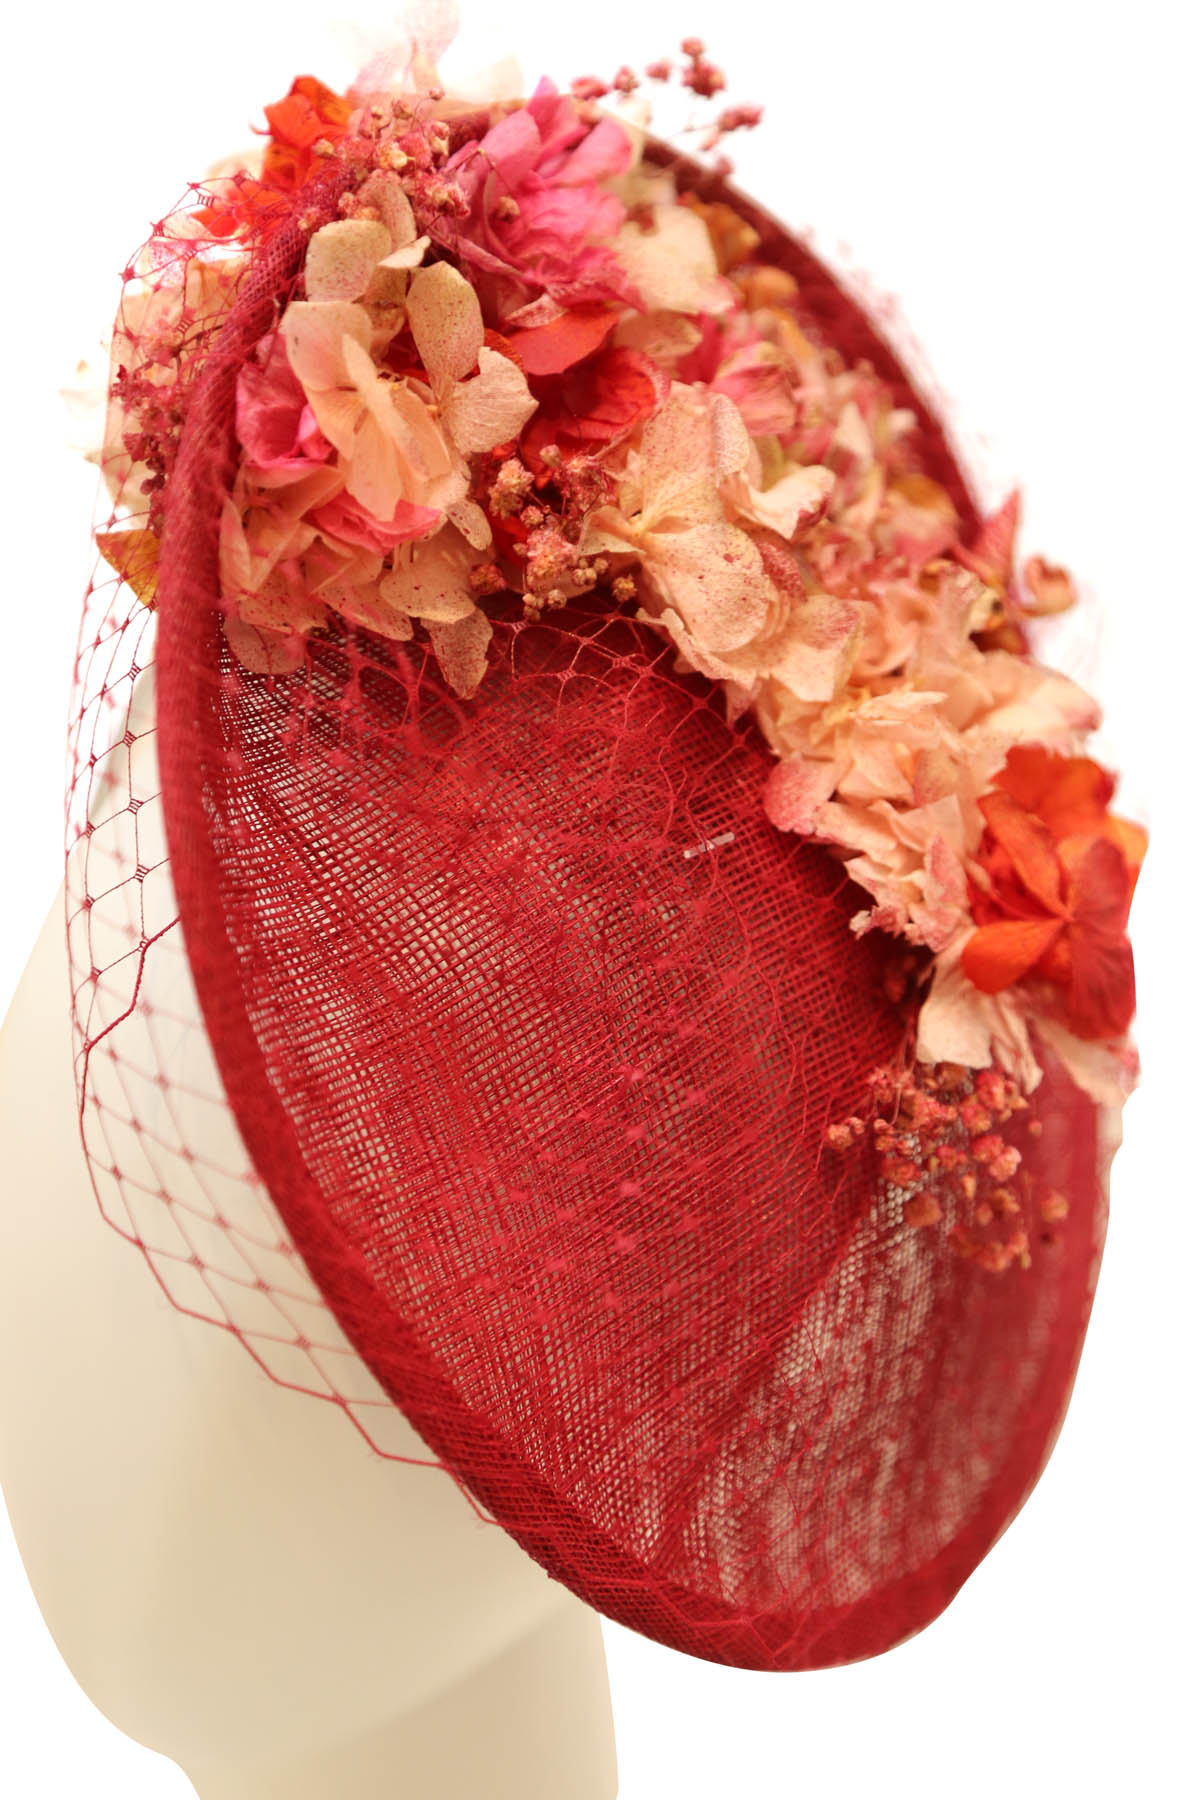 overzien Bomen planten Geest Marilyn's Pink and Red Floral Fascinator with Veiling - Marilyn's